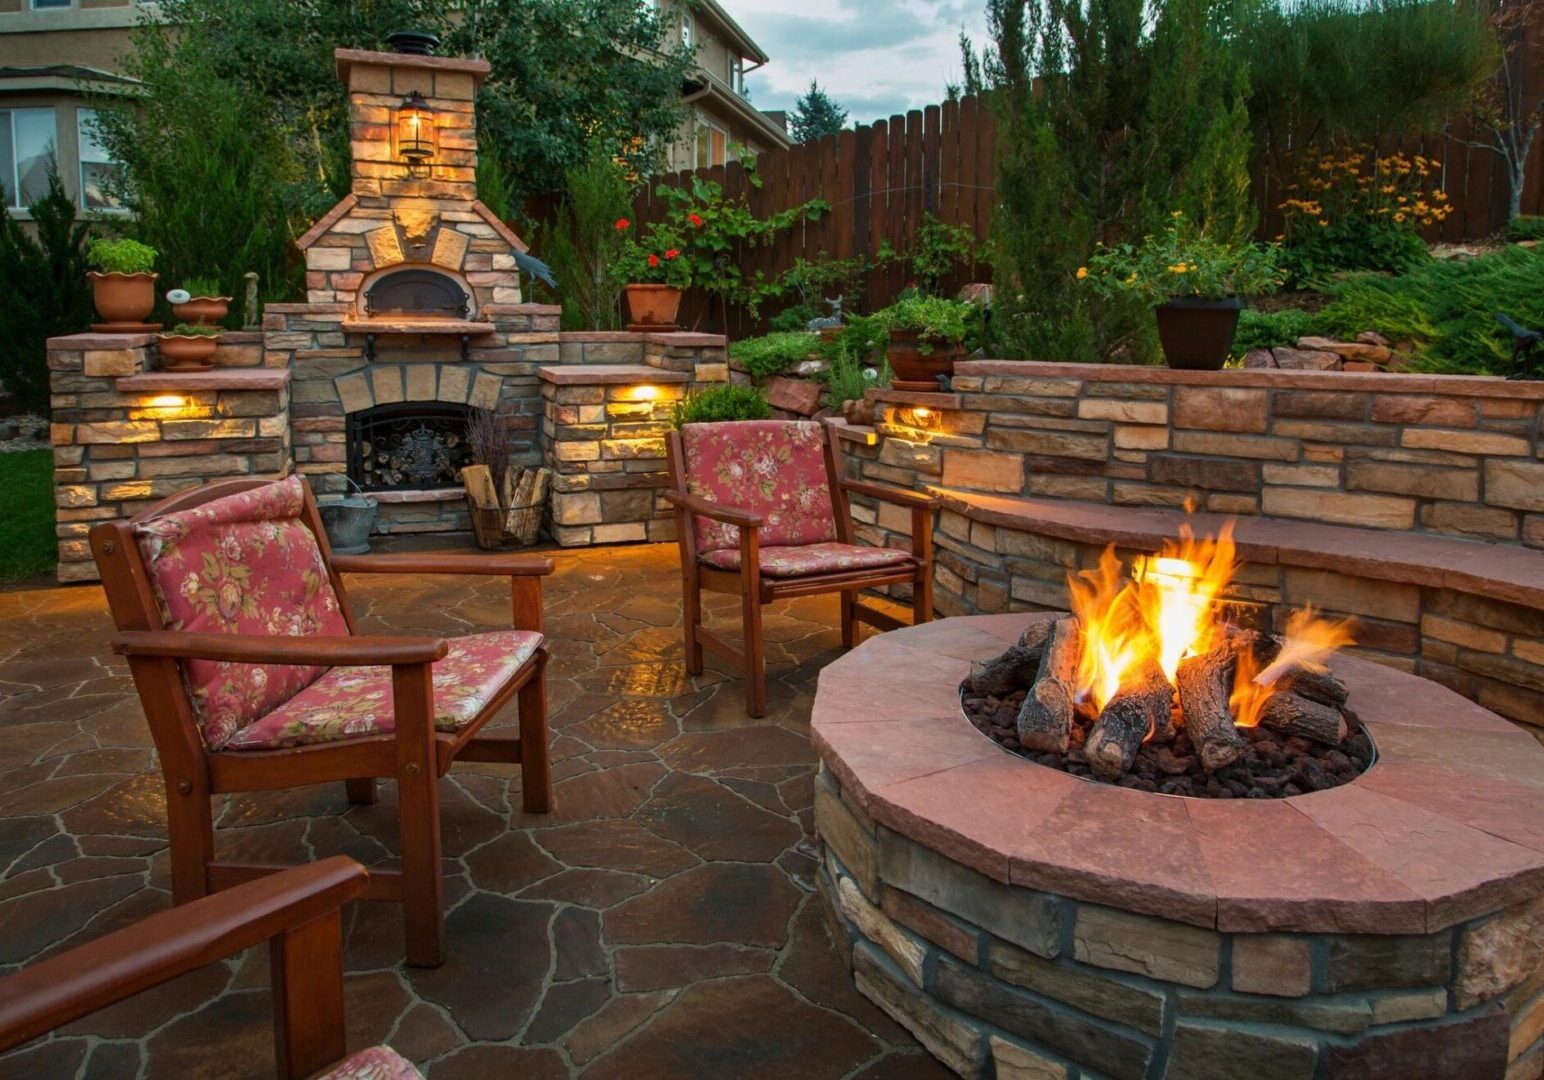 A fire pit with chairs around it and lights on.